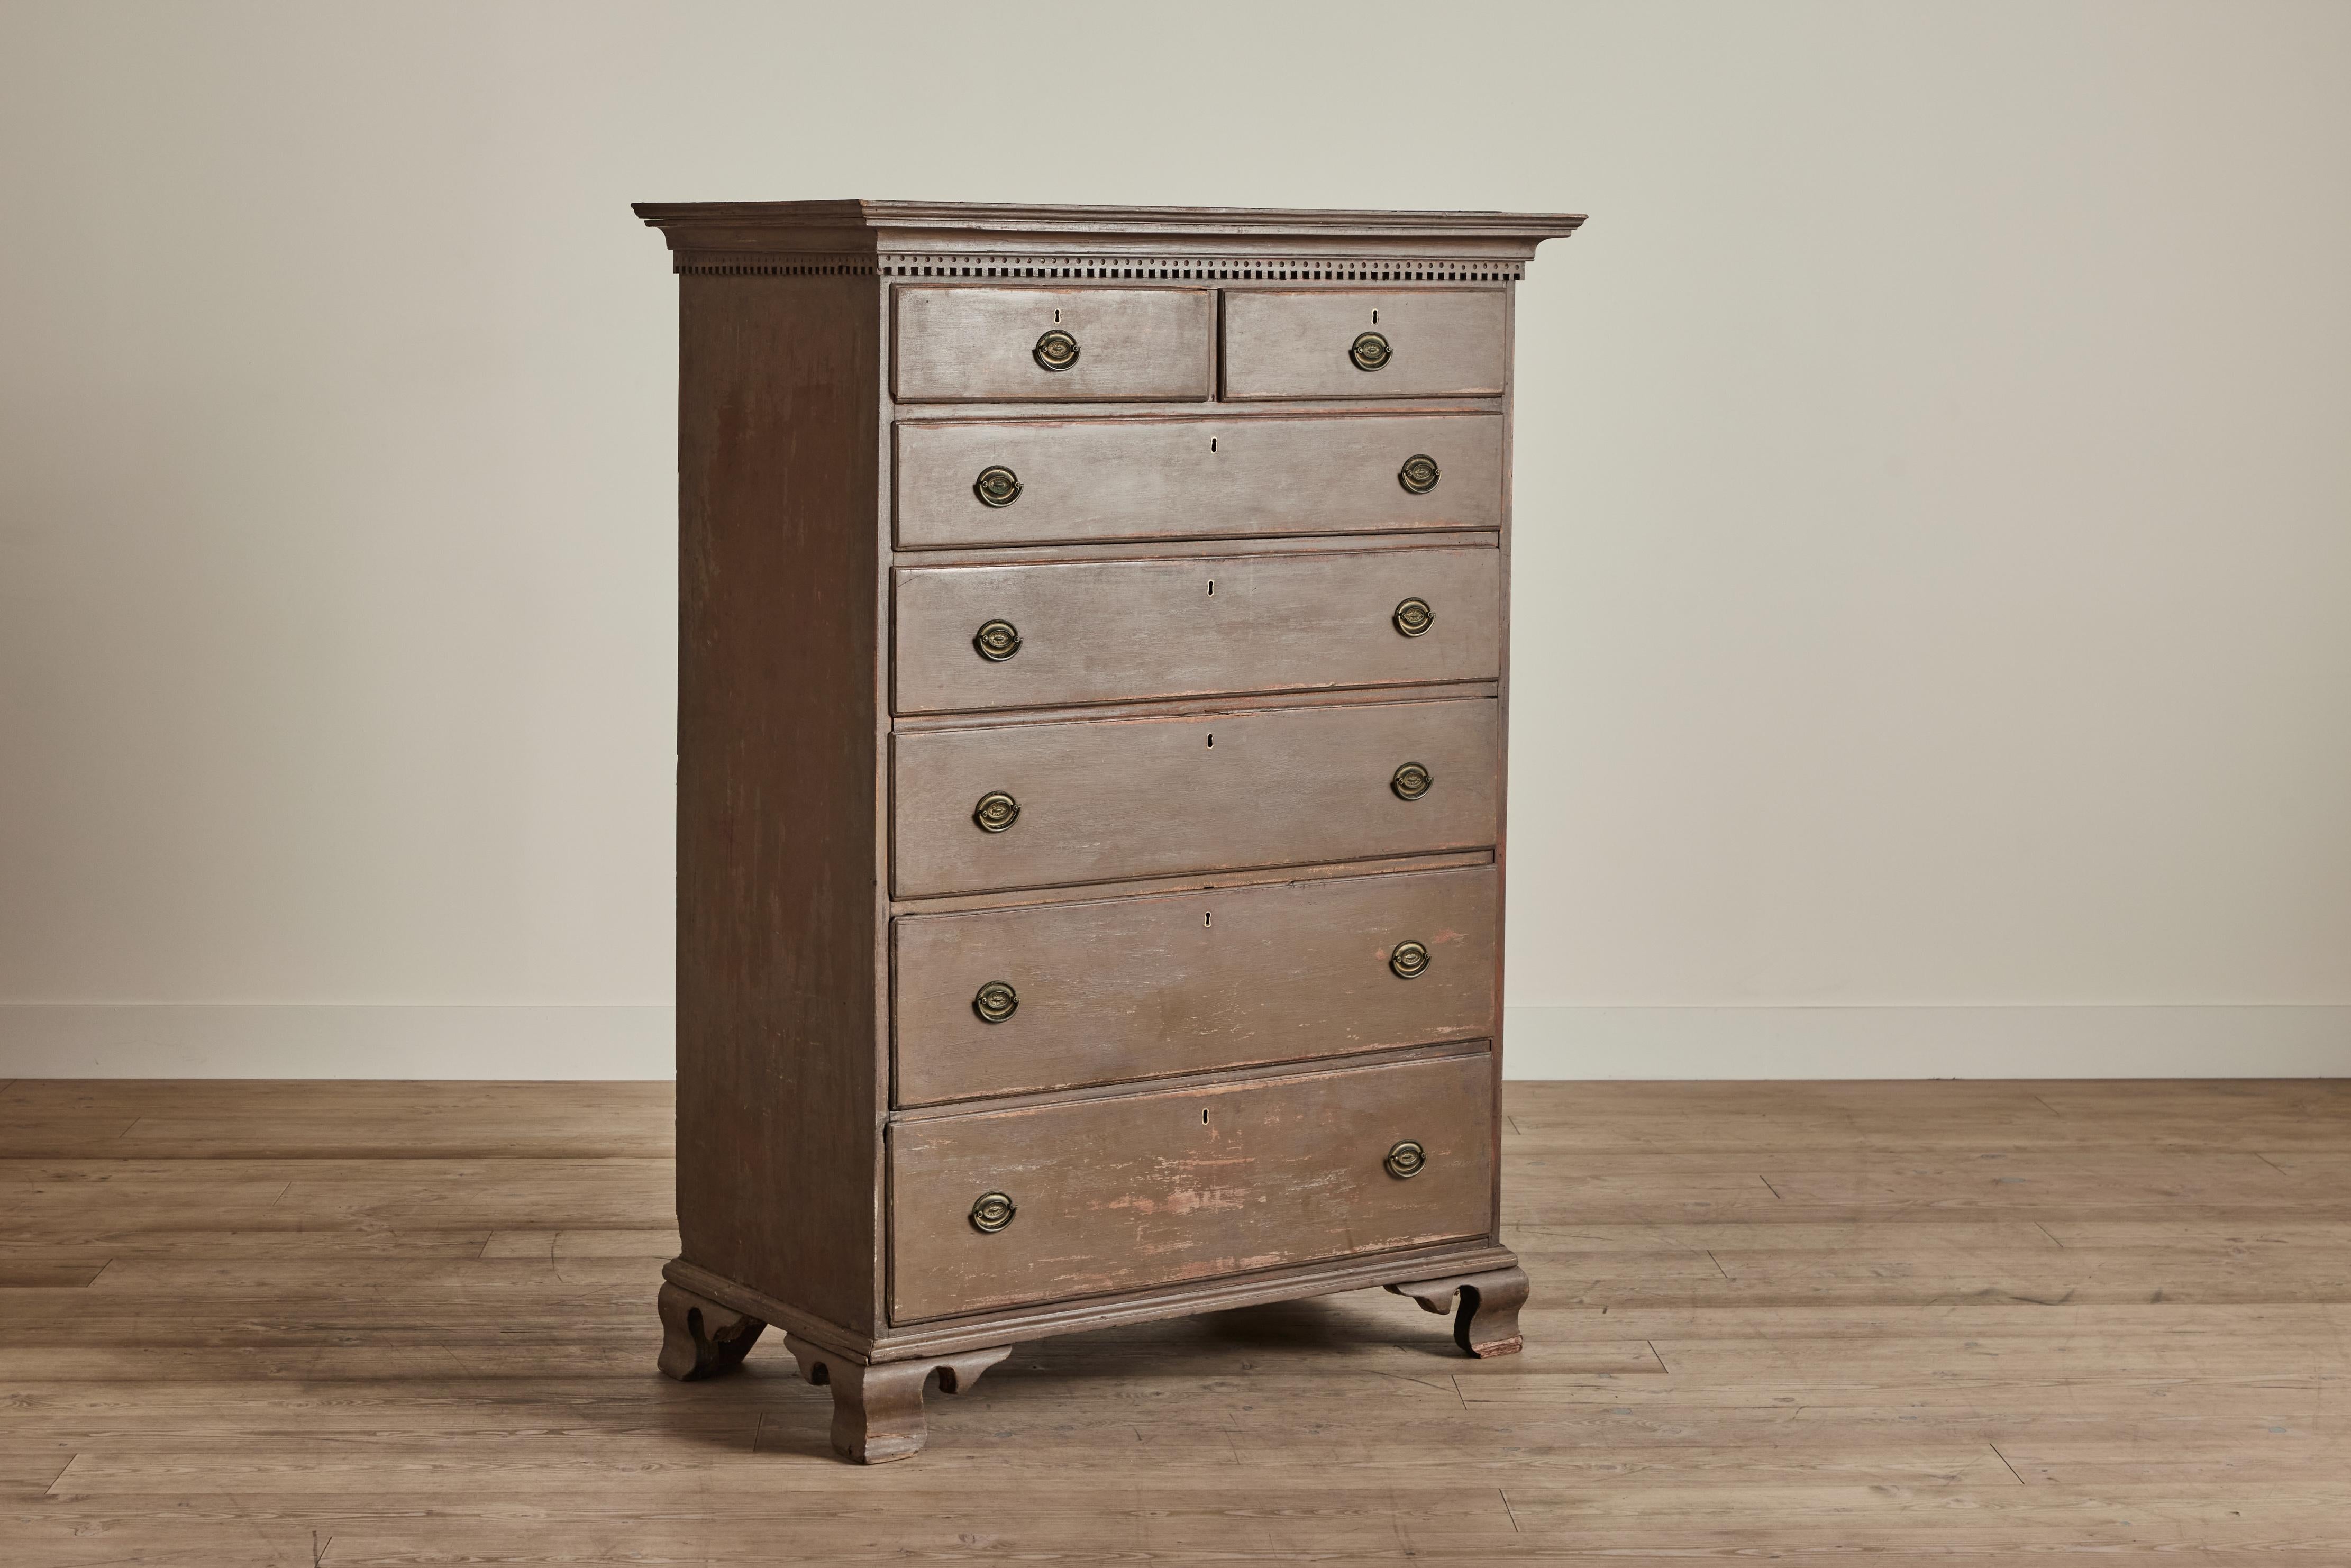 Painted nineteenth century Hepplewhite style highboy dresser. This stately case good has seven drawers for ample storage. Some wear on wood and finish that is consistent with age and use. 